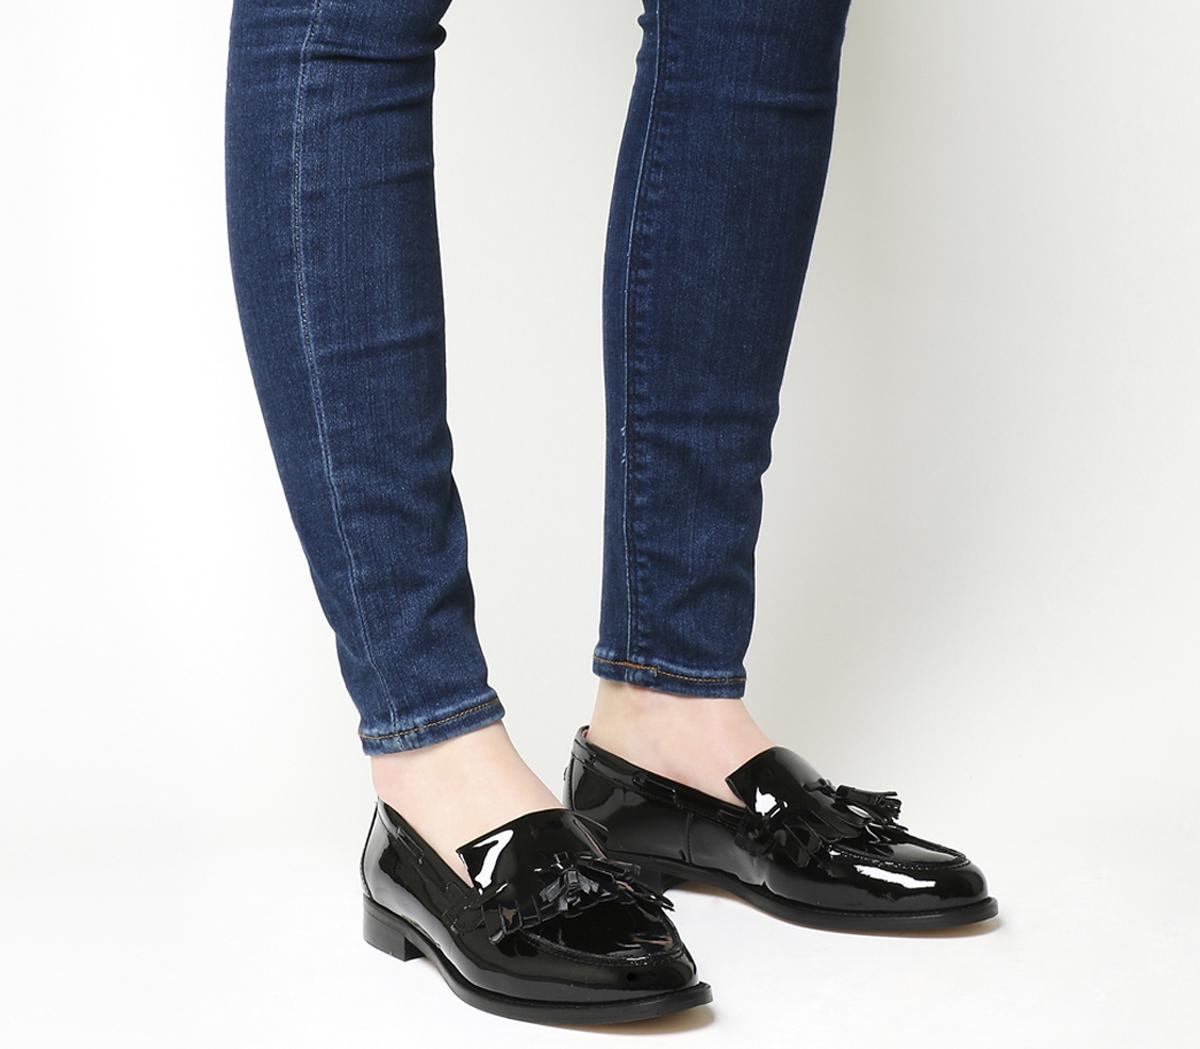 black patent loafers